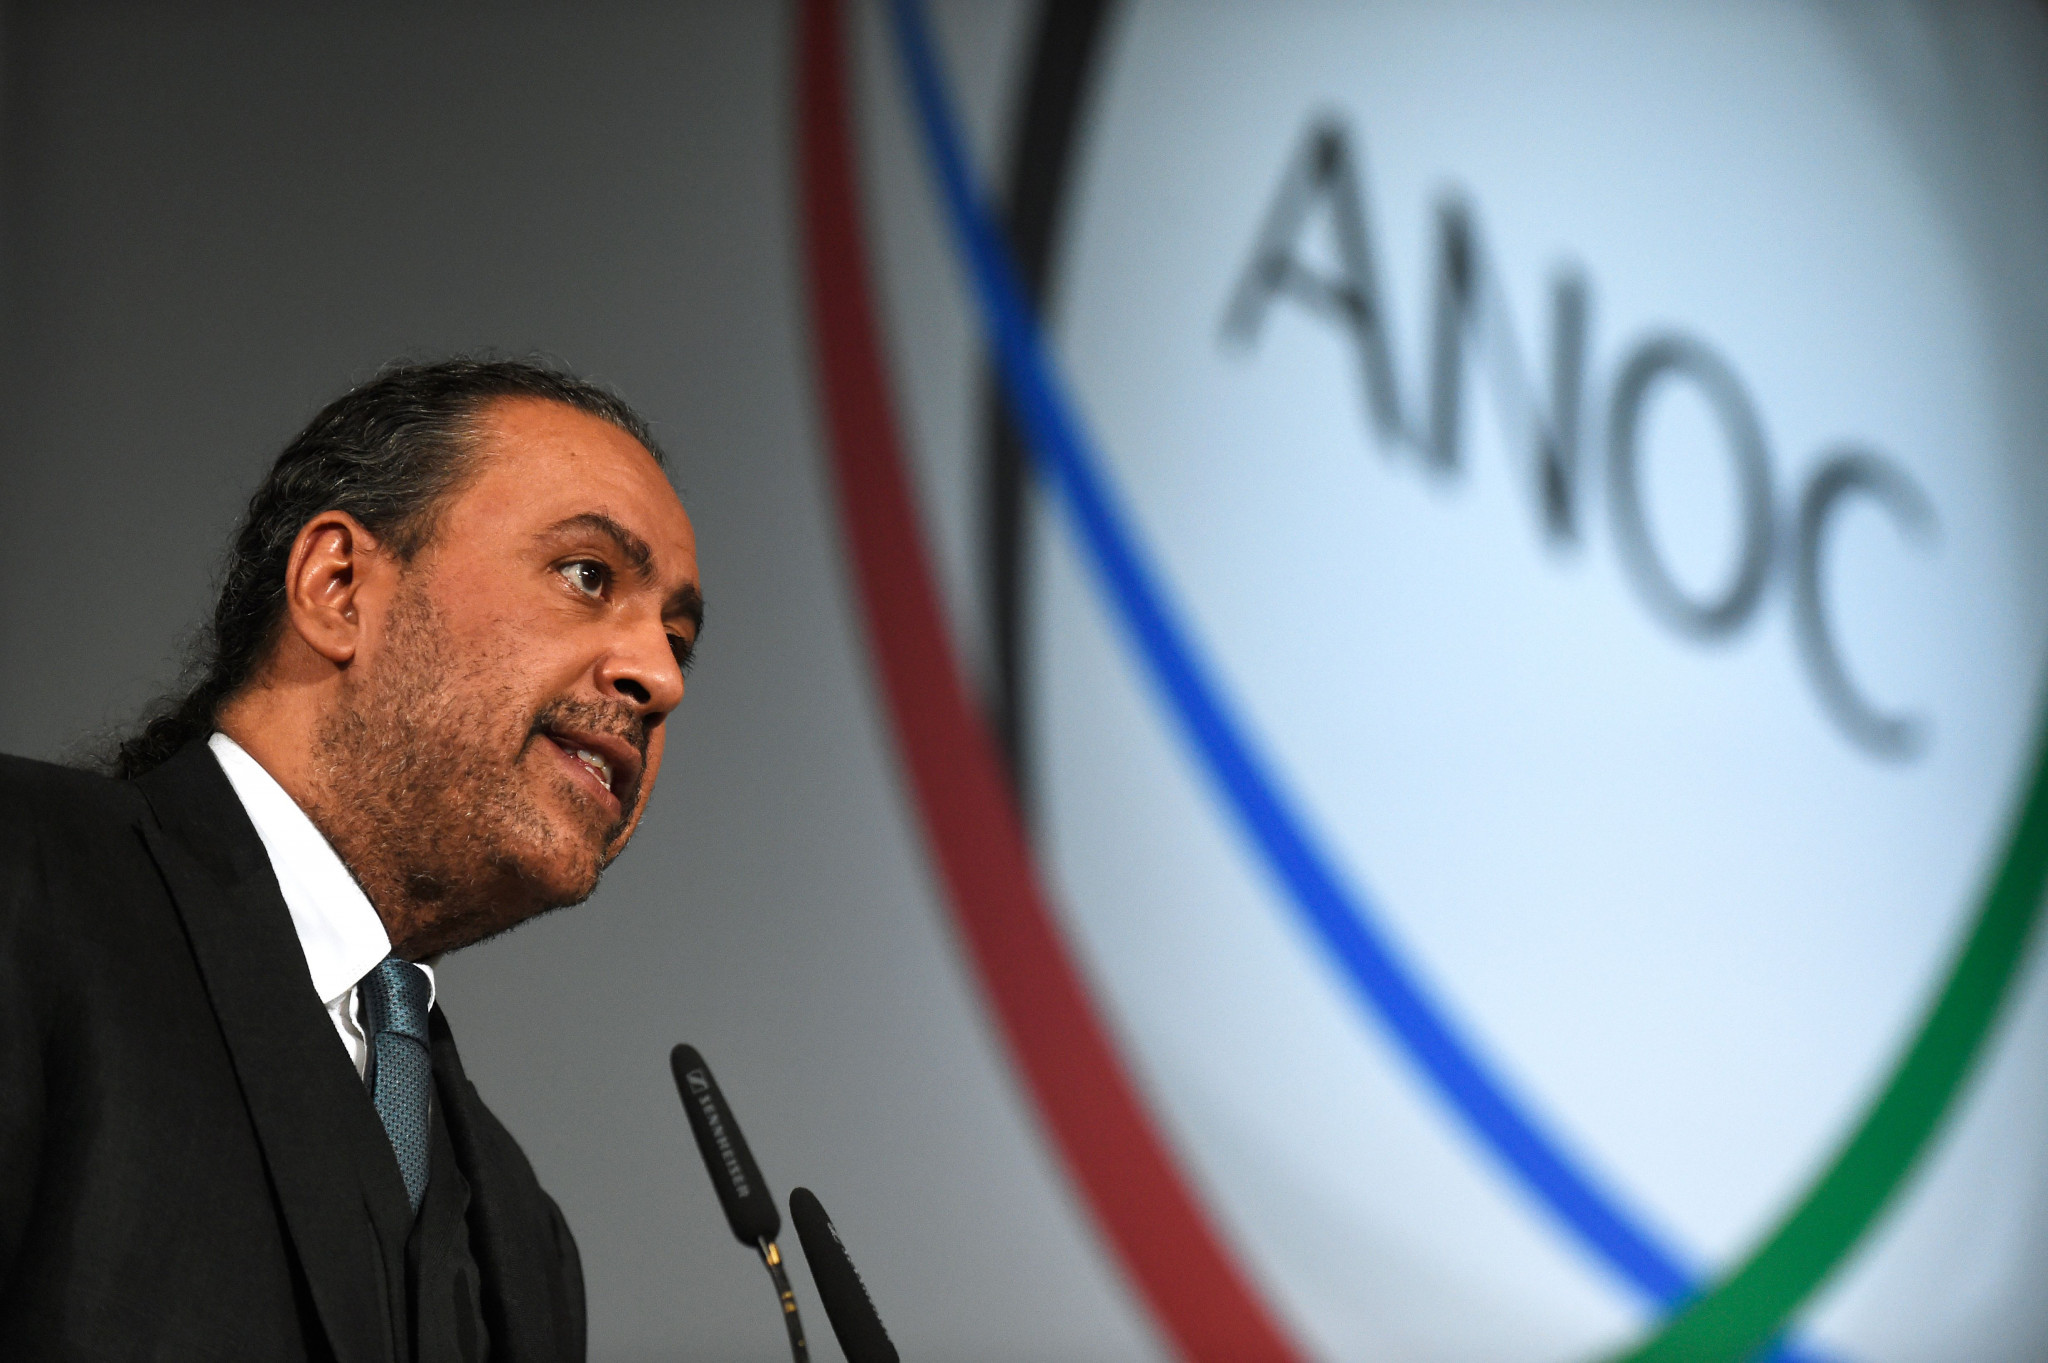 Sheikh Ahmad given round of applause after cleared of wrongdoing by ANOC General Assembly